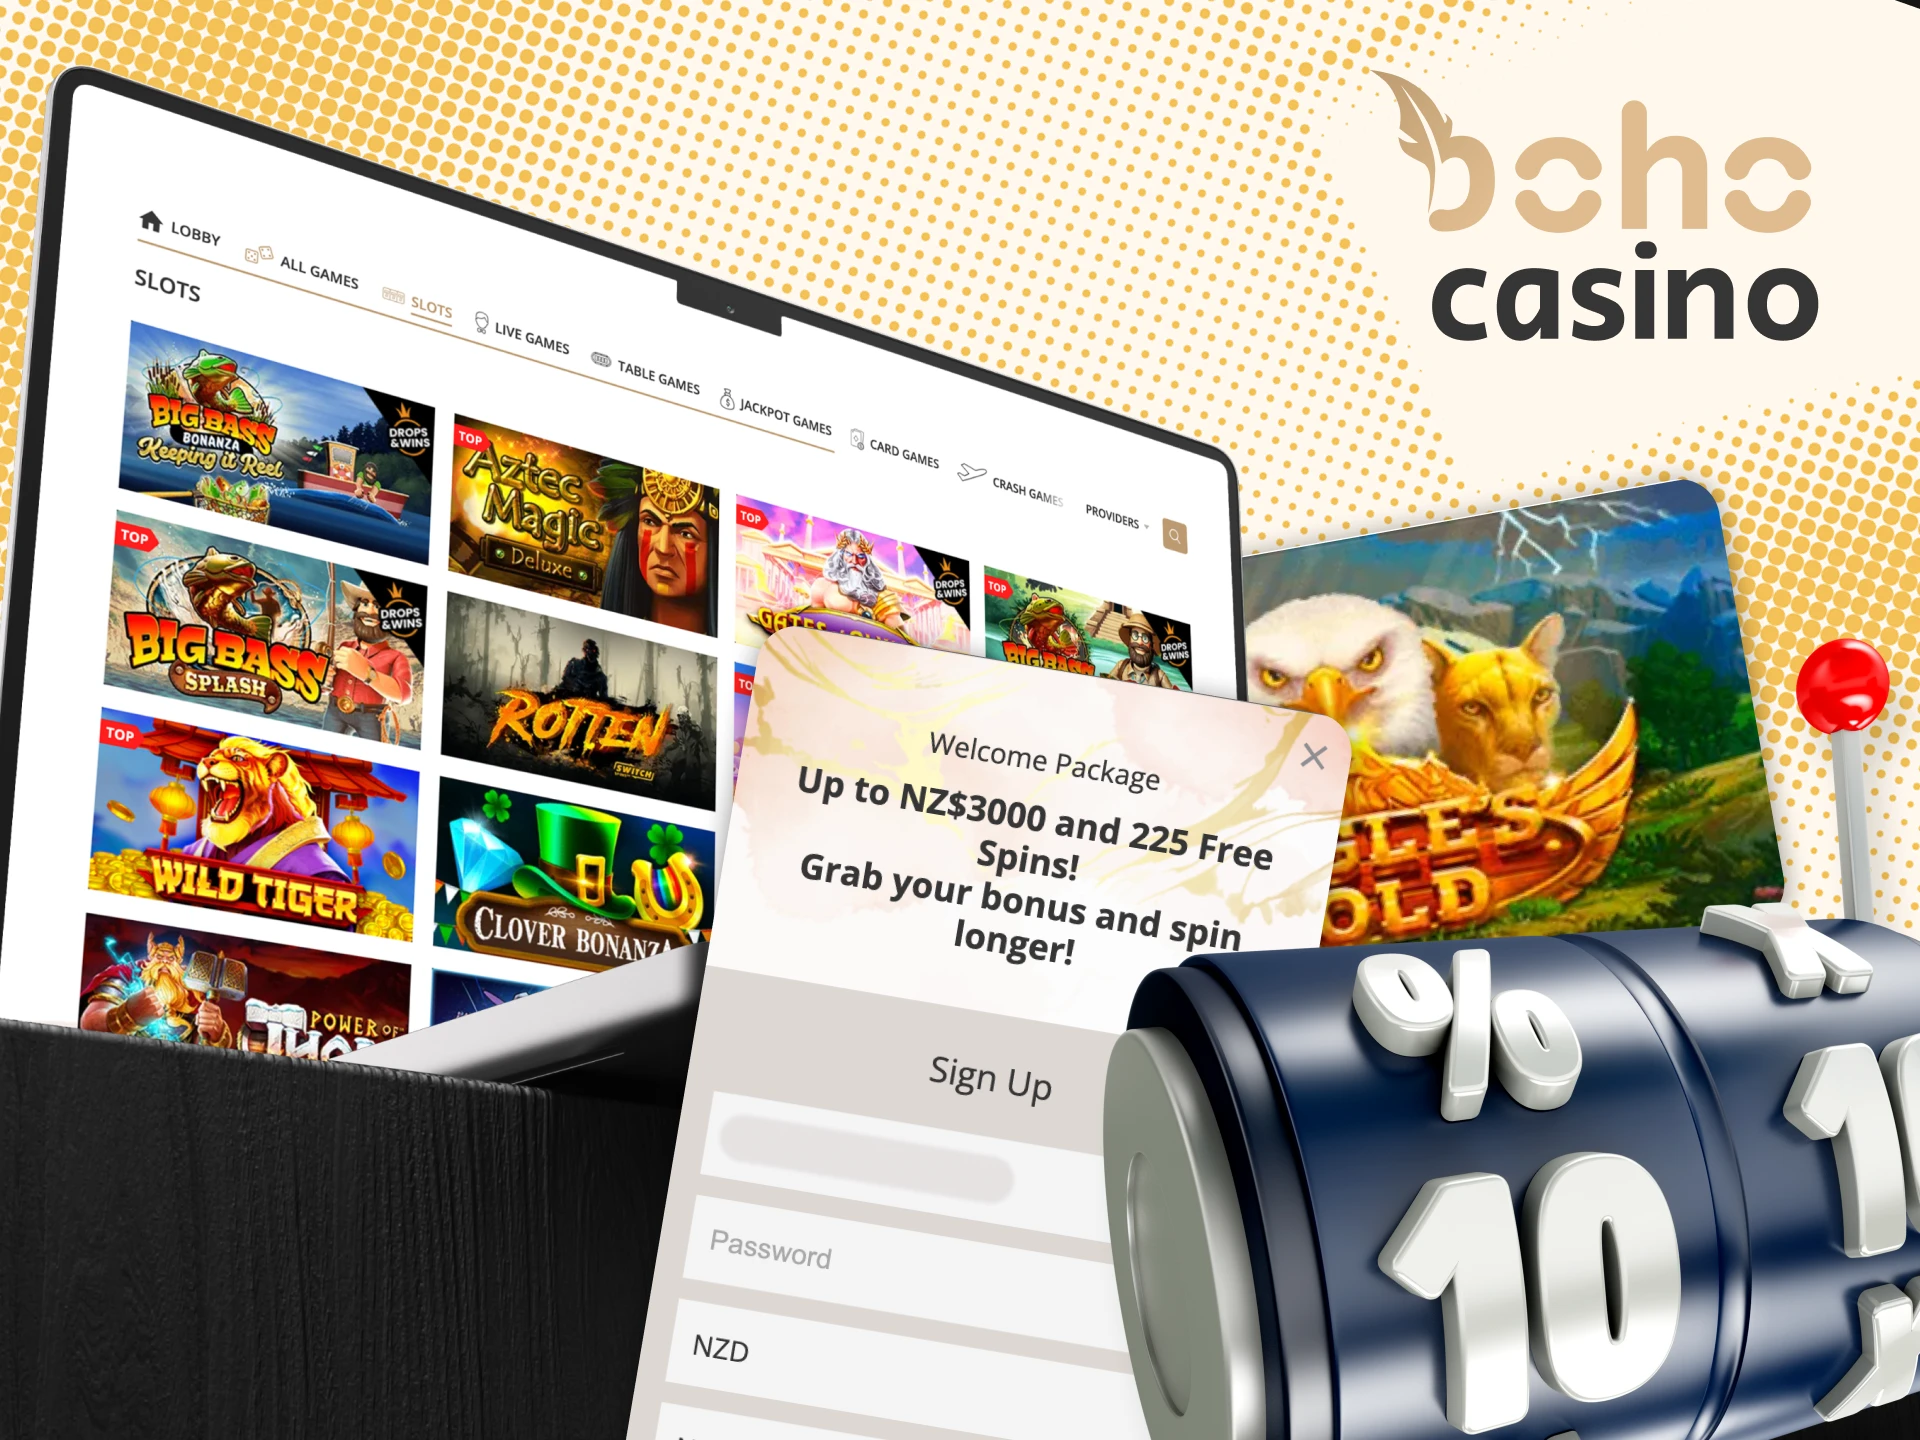 After completing your Boho Casino registration, you can start playing slots.